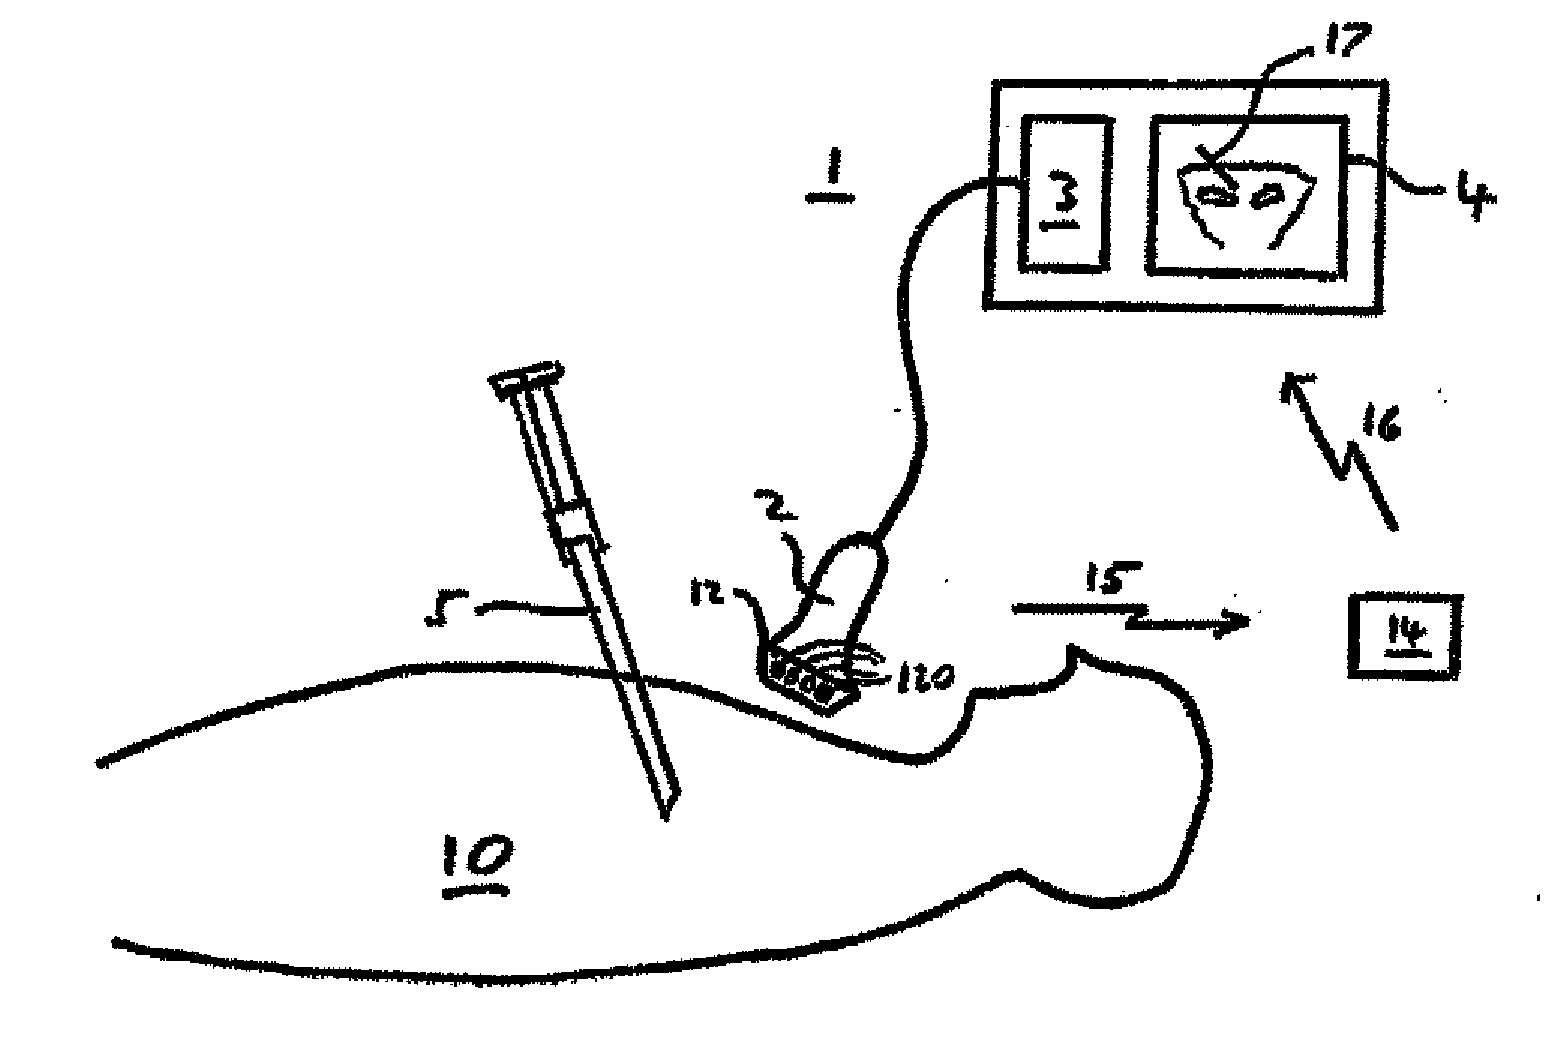 System for ultrasound image guided procedure